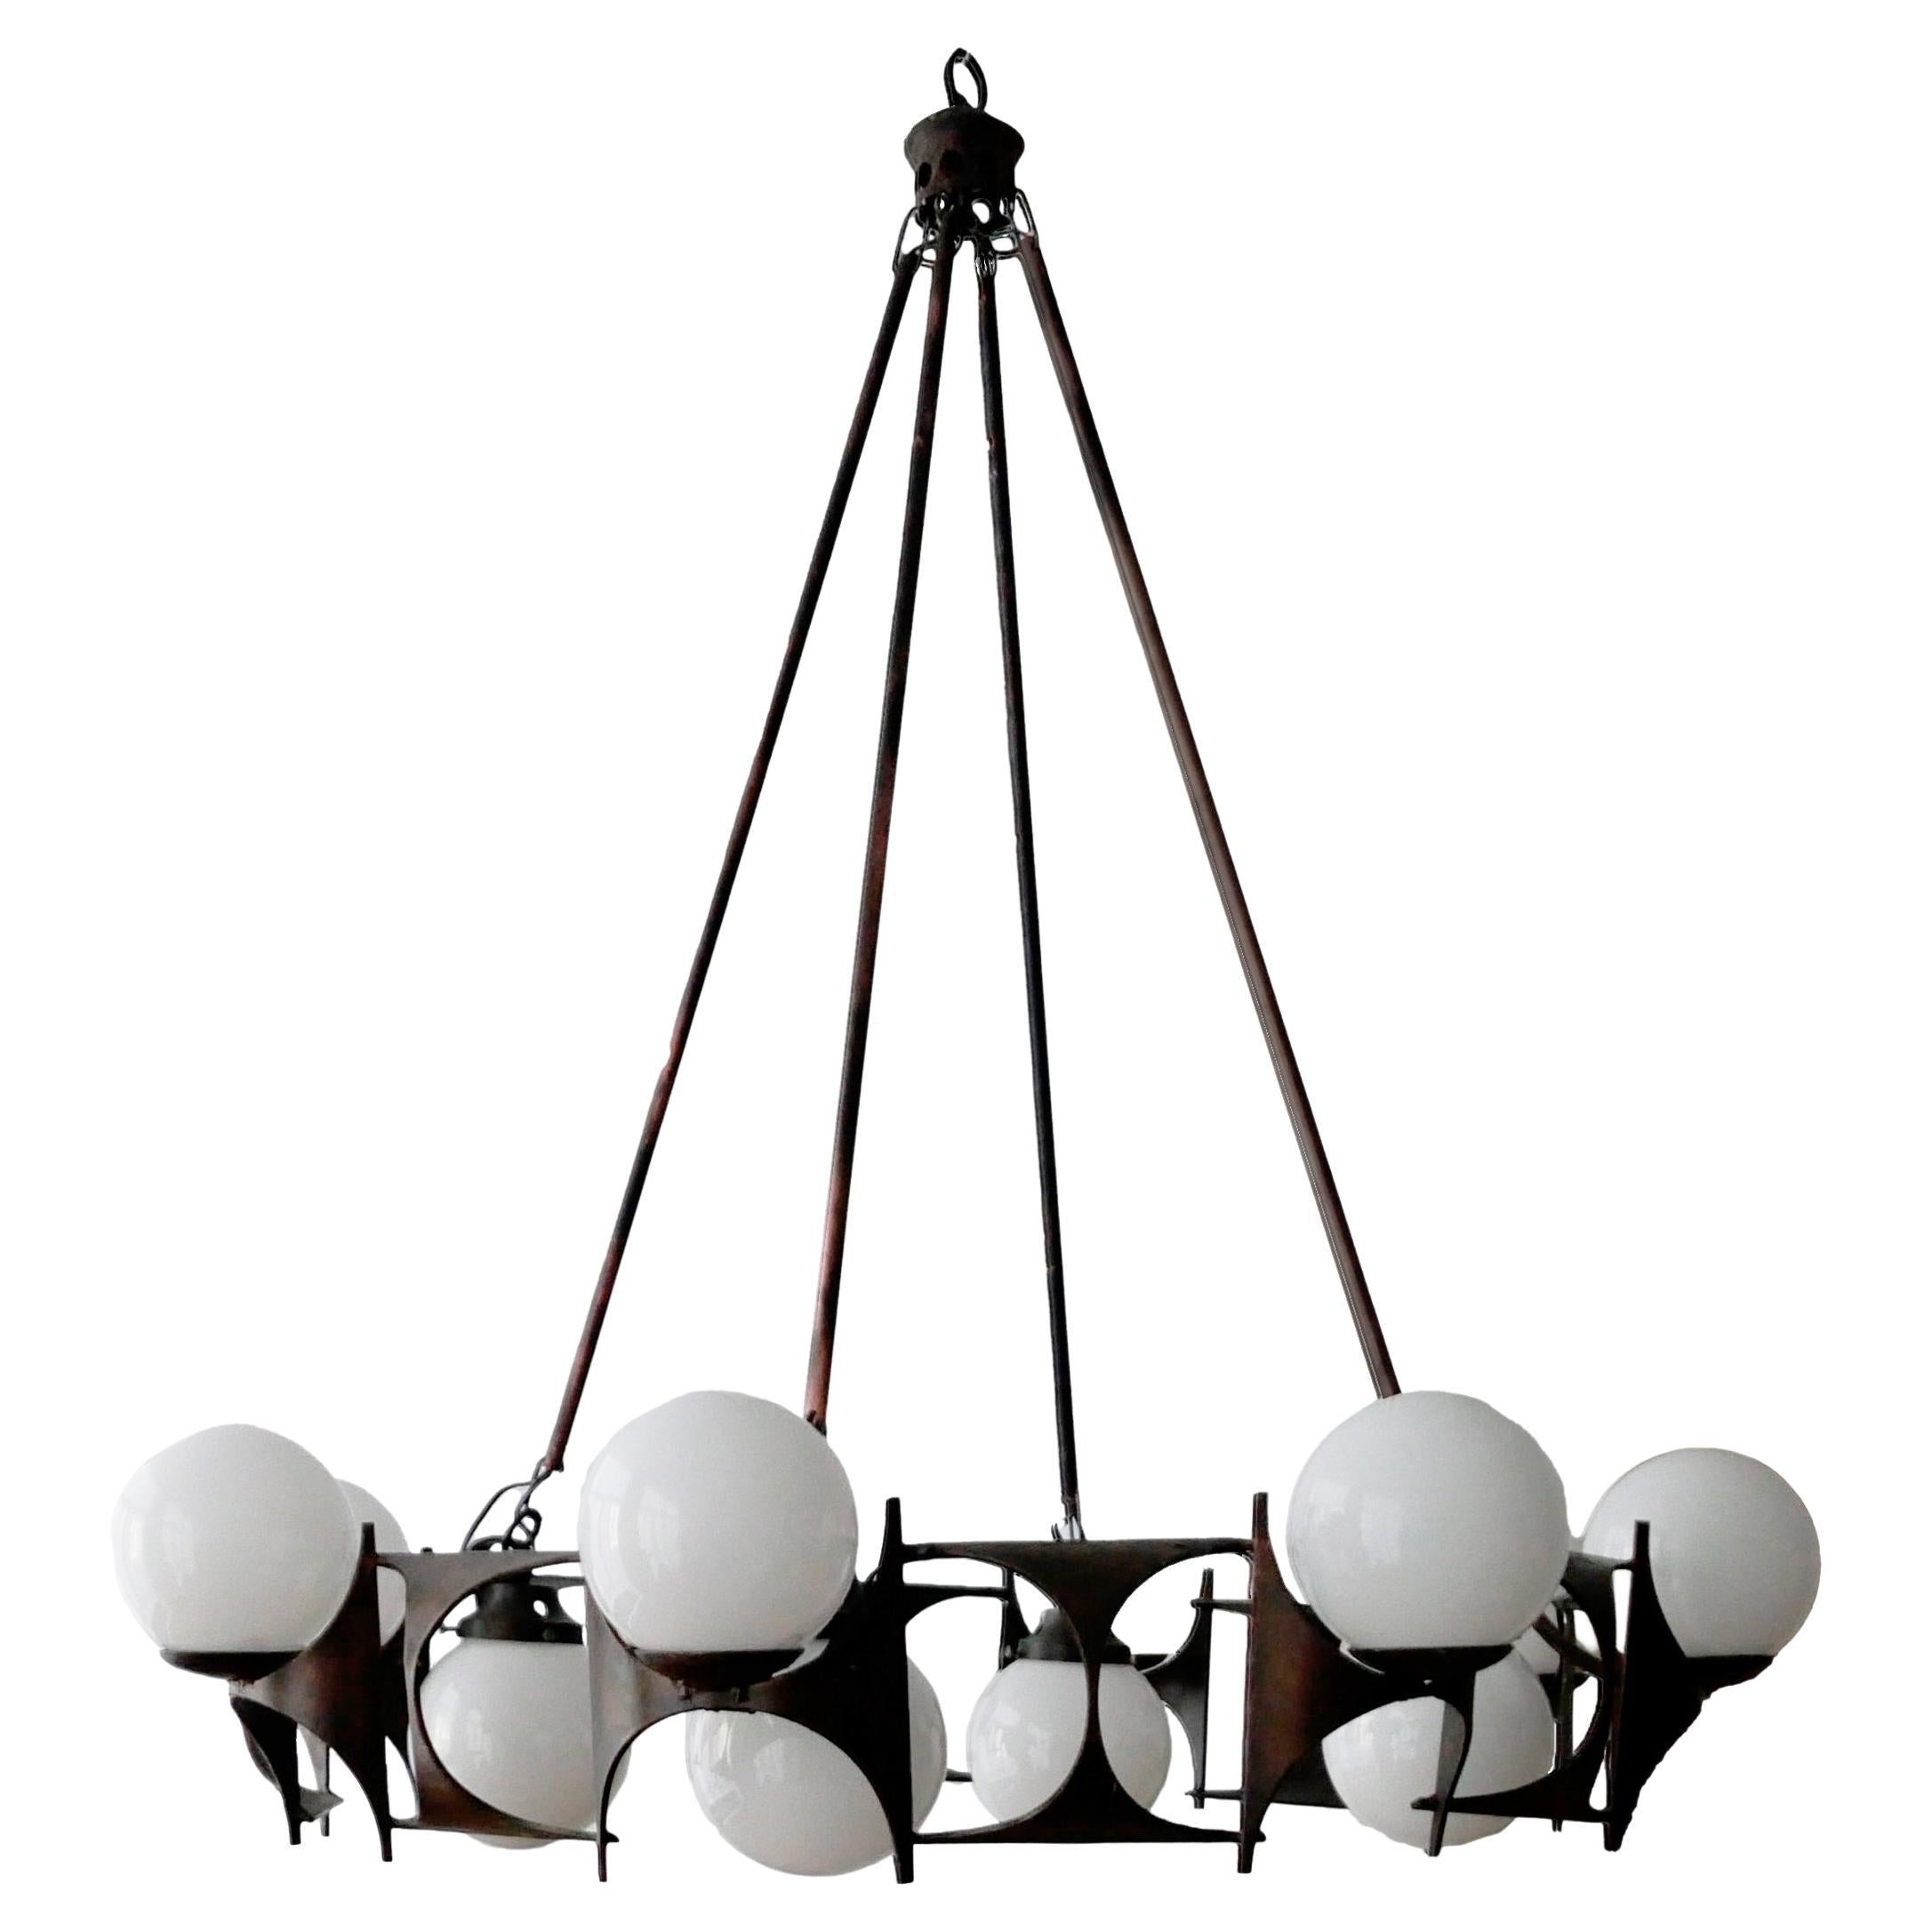  Brutalist Style Chandelier Lamp / Radius of 100 / Fom the 1950s For Sale